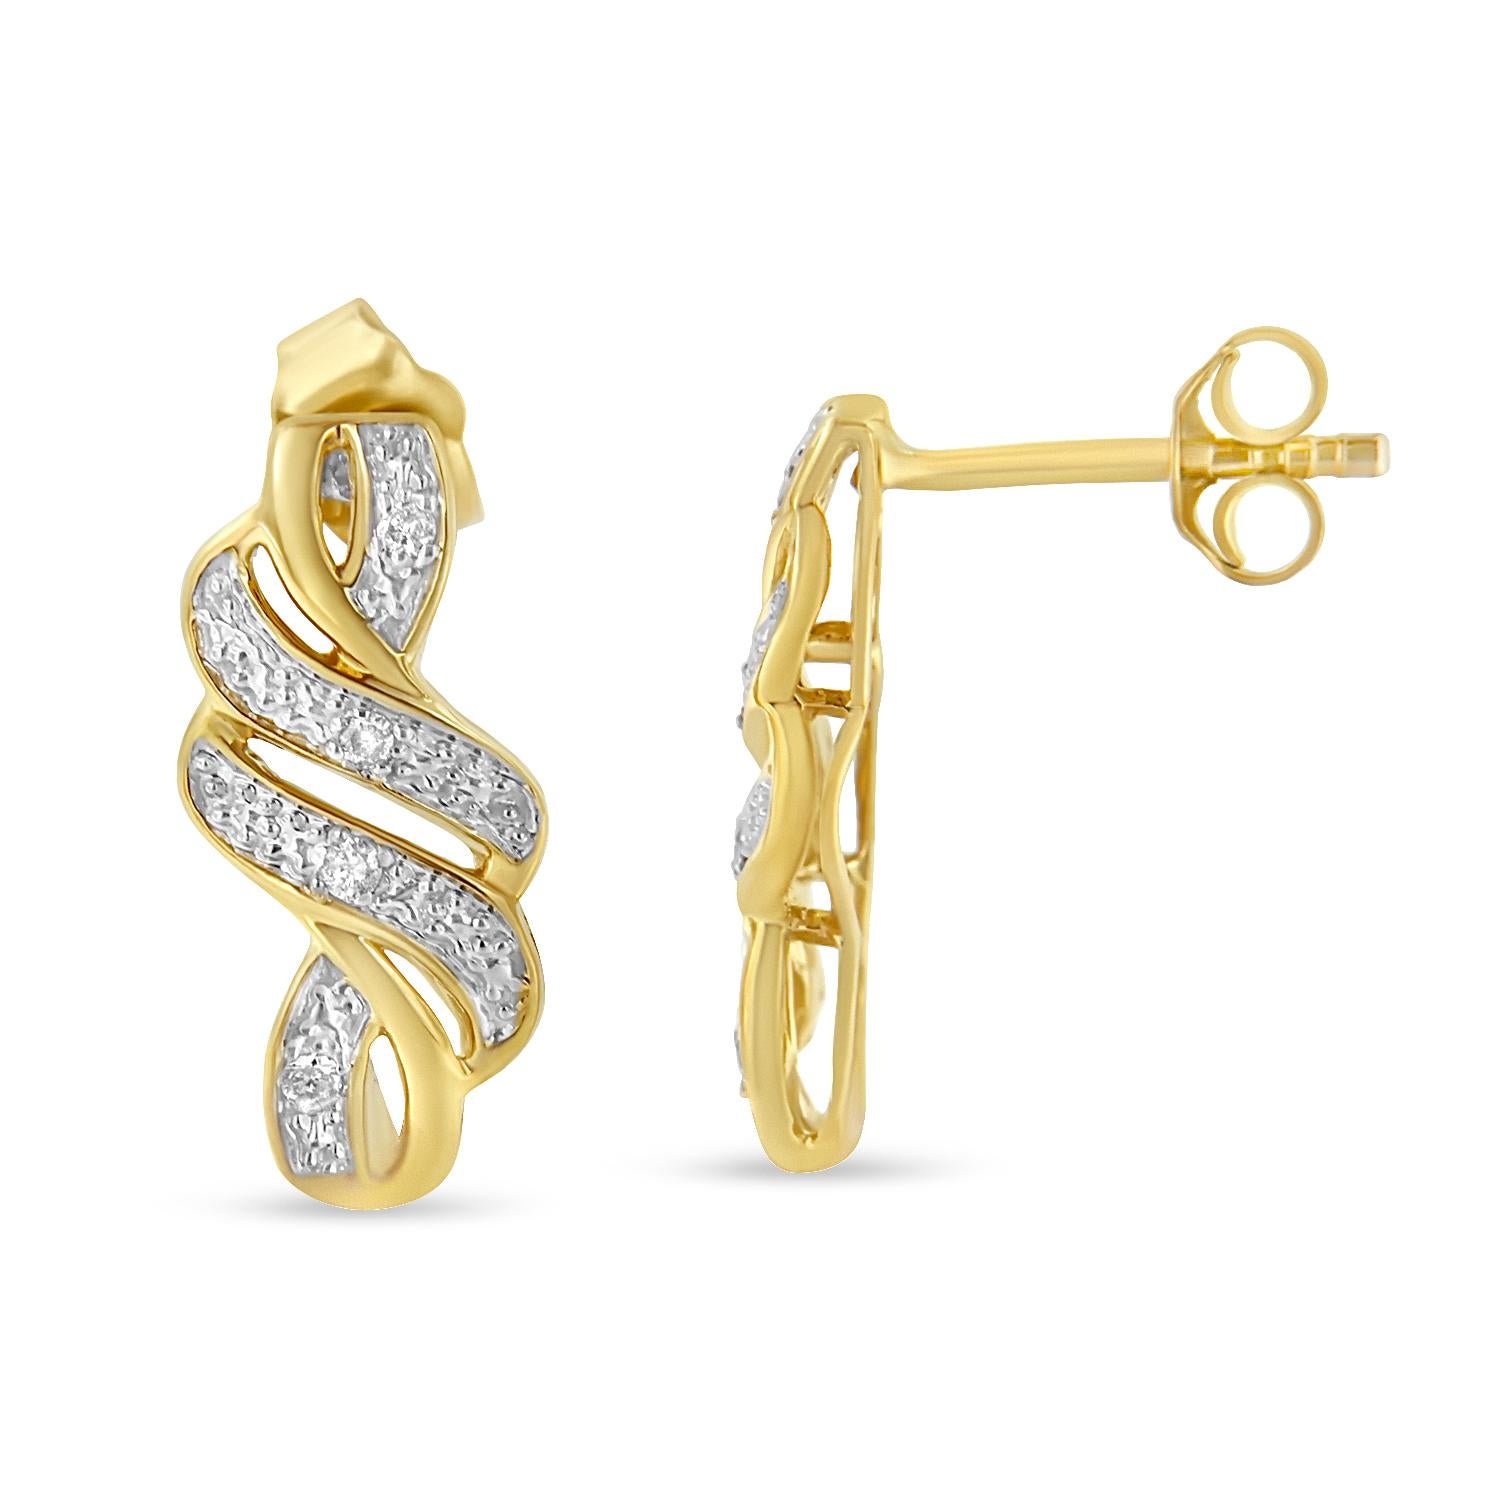 Delicate ribbons flow to create a swirl effect in these elegant and sophisticated earring design. 1/10ct TDW of dazzling roud cut diamonds inlay the ribbons. Crafted in 10k yellow gold plated sterling silver and fitted with a push back secure fit,